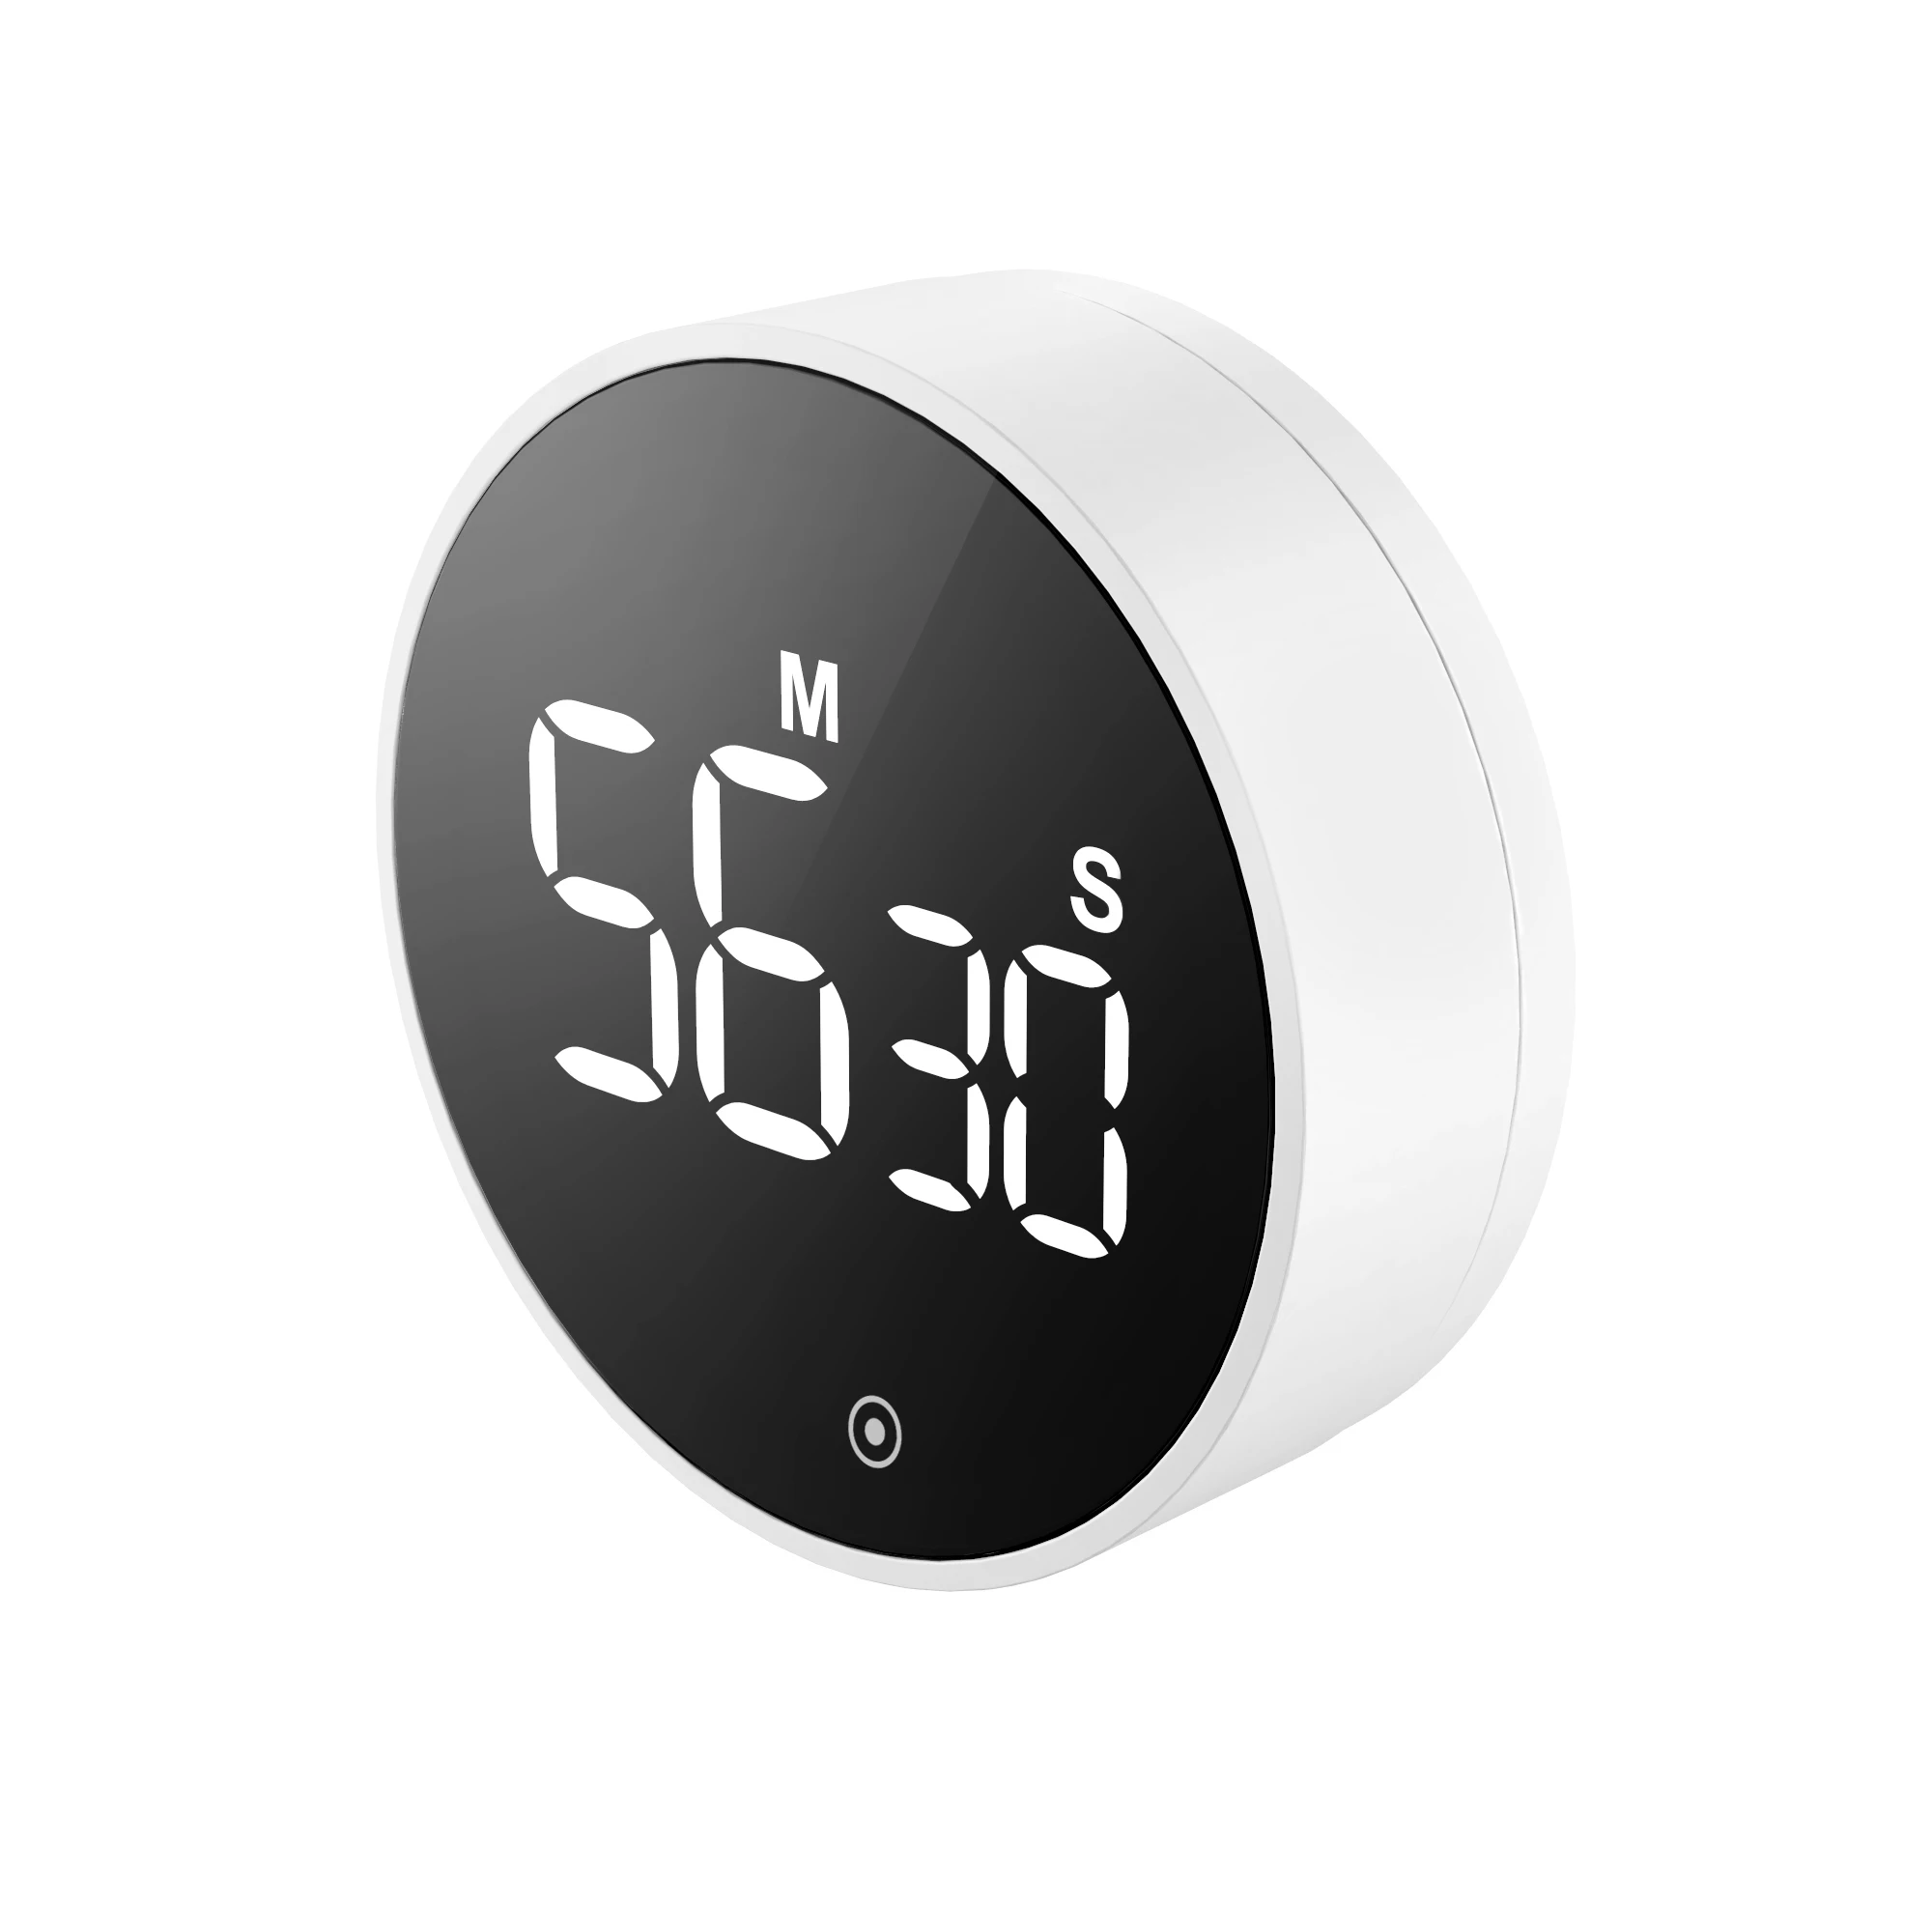 https://ae01.alicdn.com/kf/S476f6e1bb17f4818816164661f70bd18w/LED-Kitchen-Timer-Digital-Knob-Timer-Magnetic-Electronic-Manual-Countdown-Timer-Cooking-Shower-Study-Fitness-Stopwatch.jpg